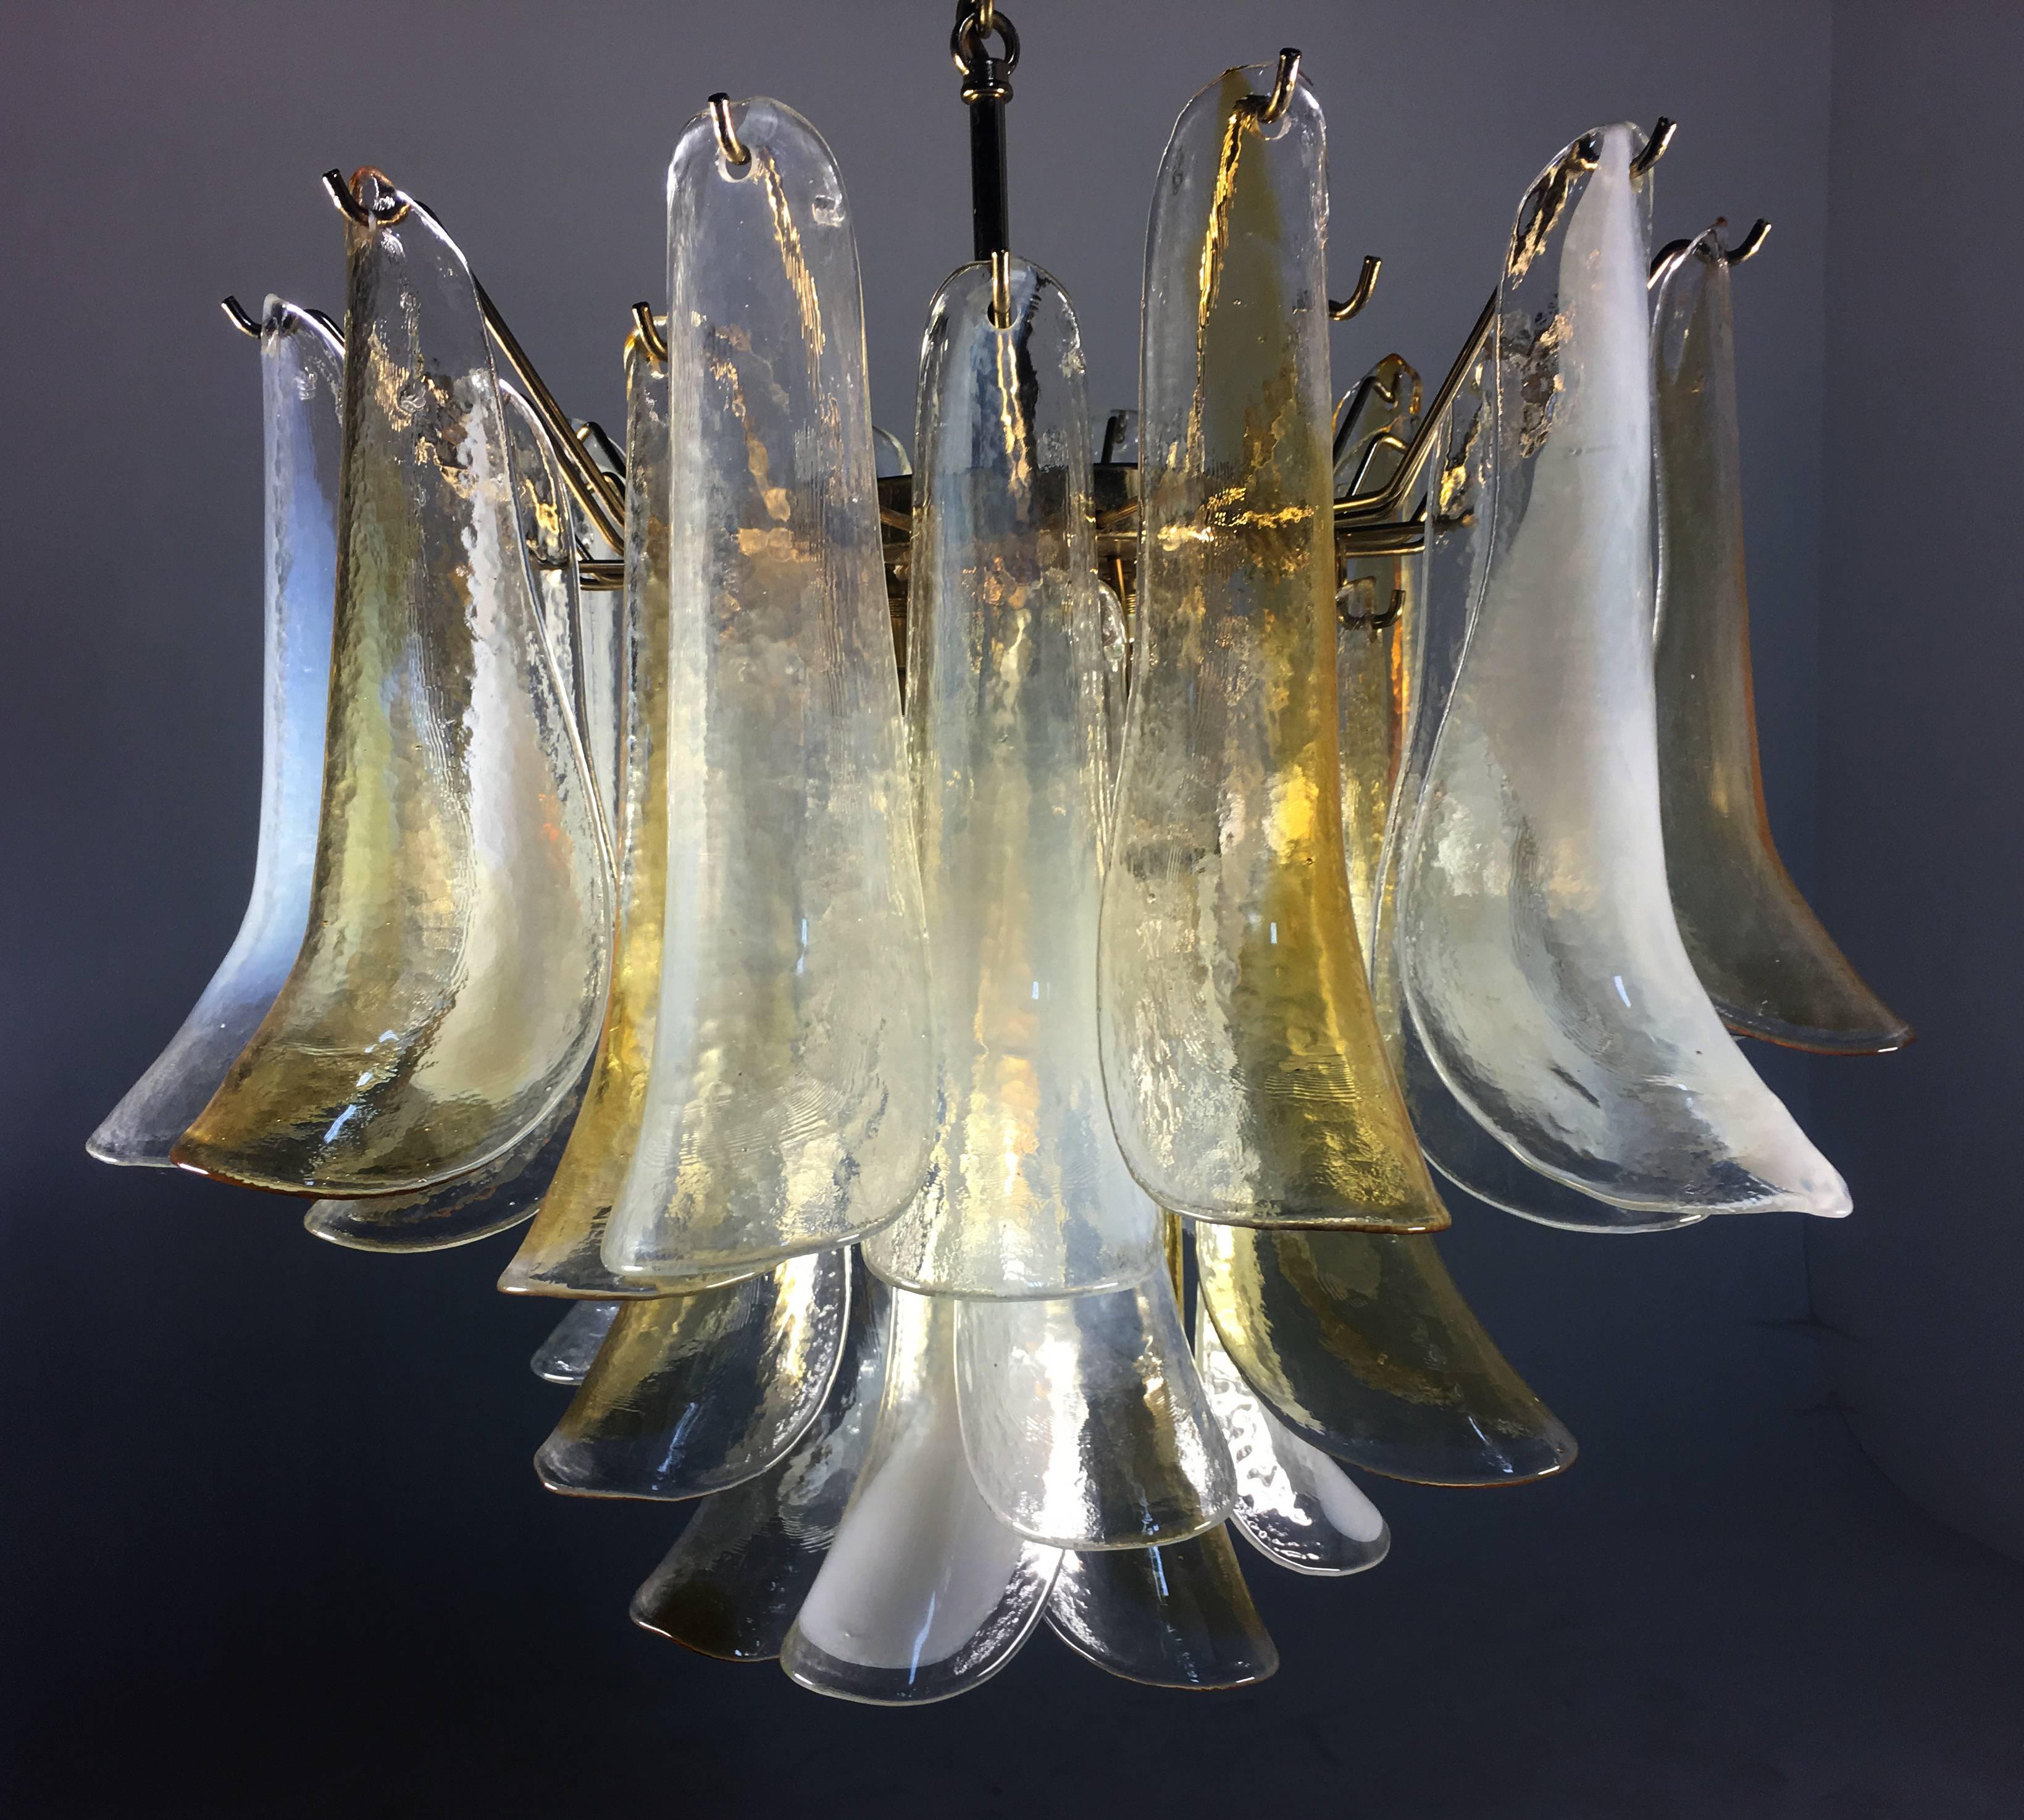 Elegant Pair of Chandeliers White and Amber Petals, Murano, 1990s For Sale 14